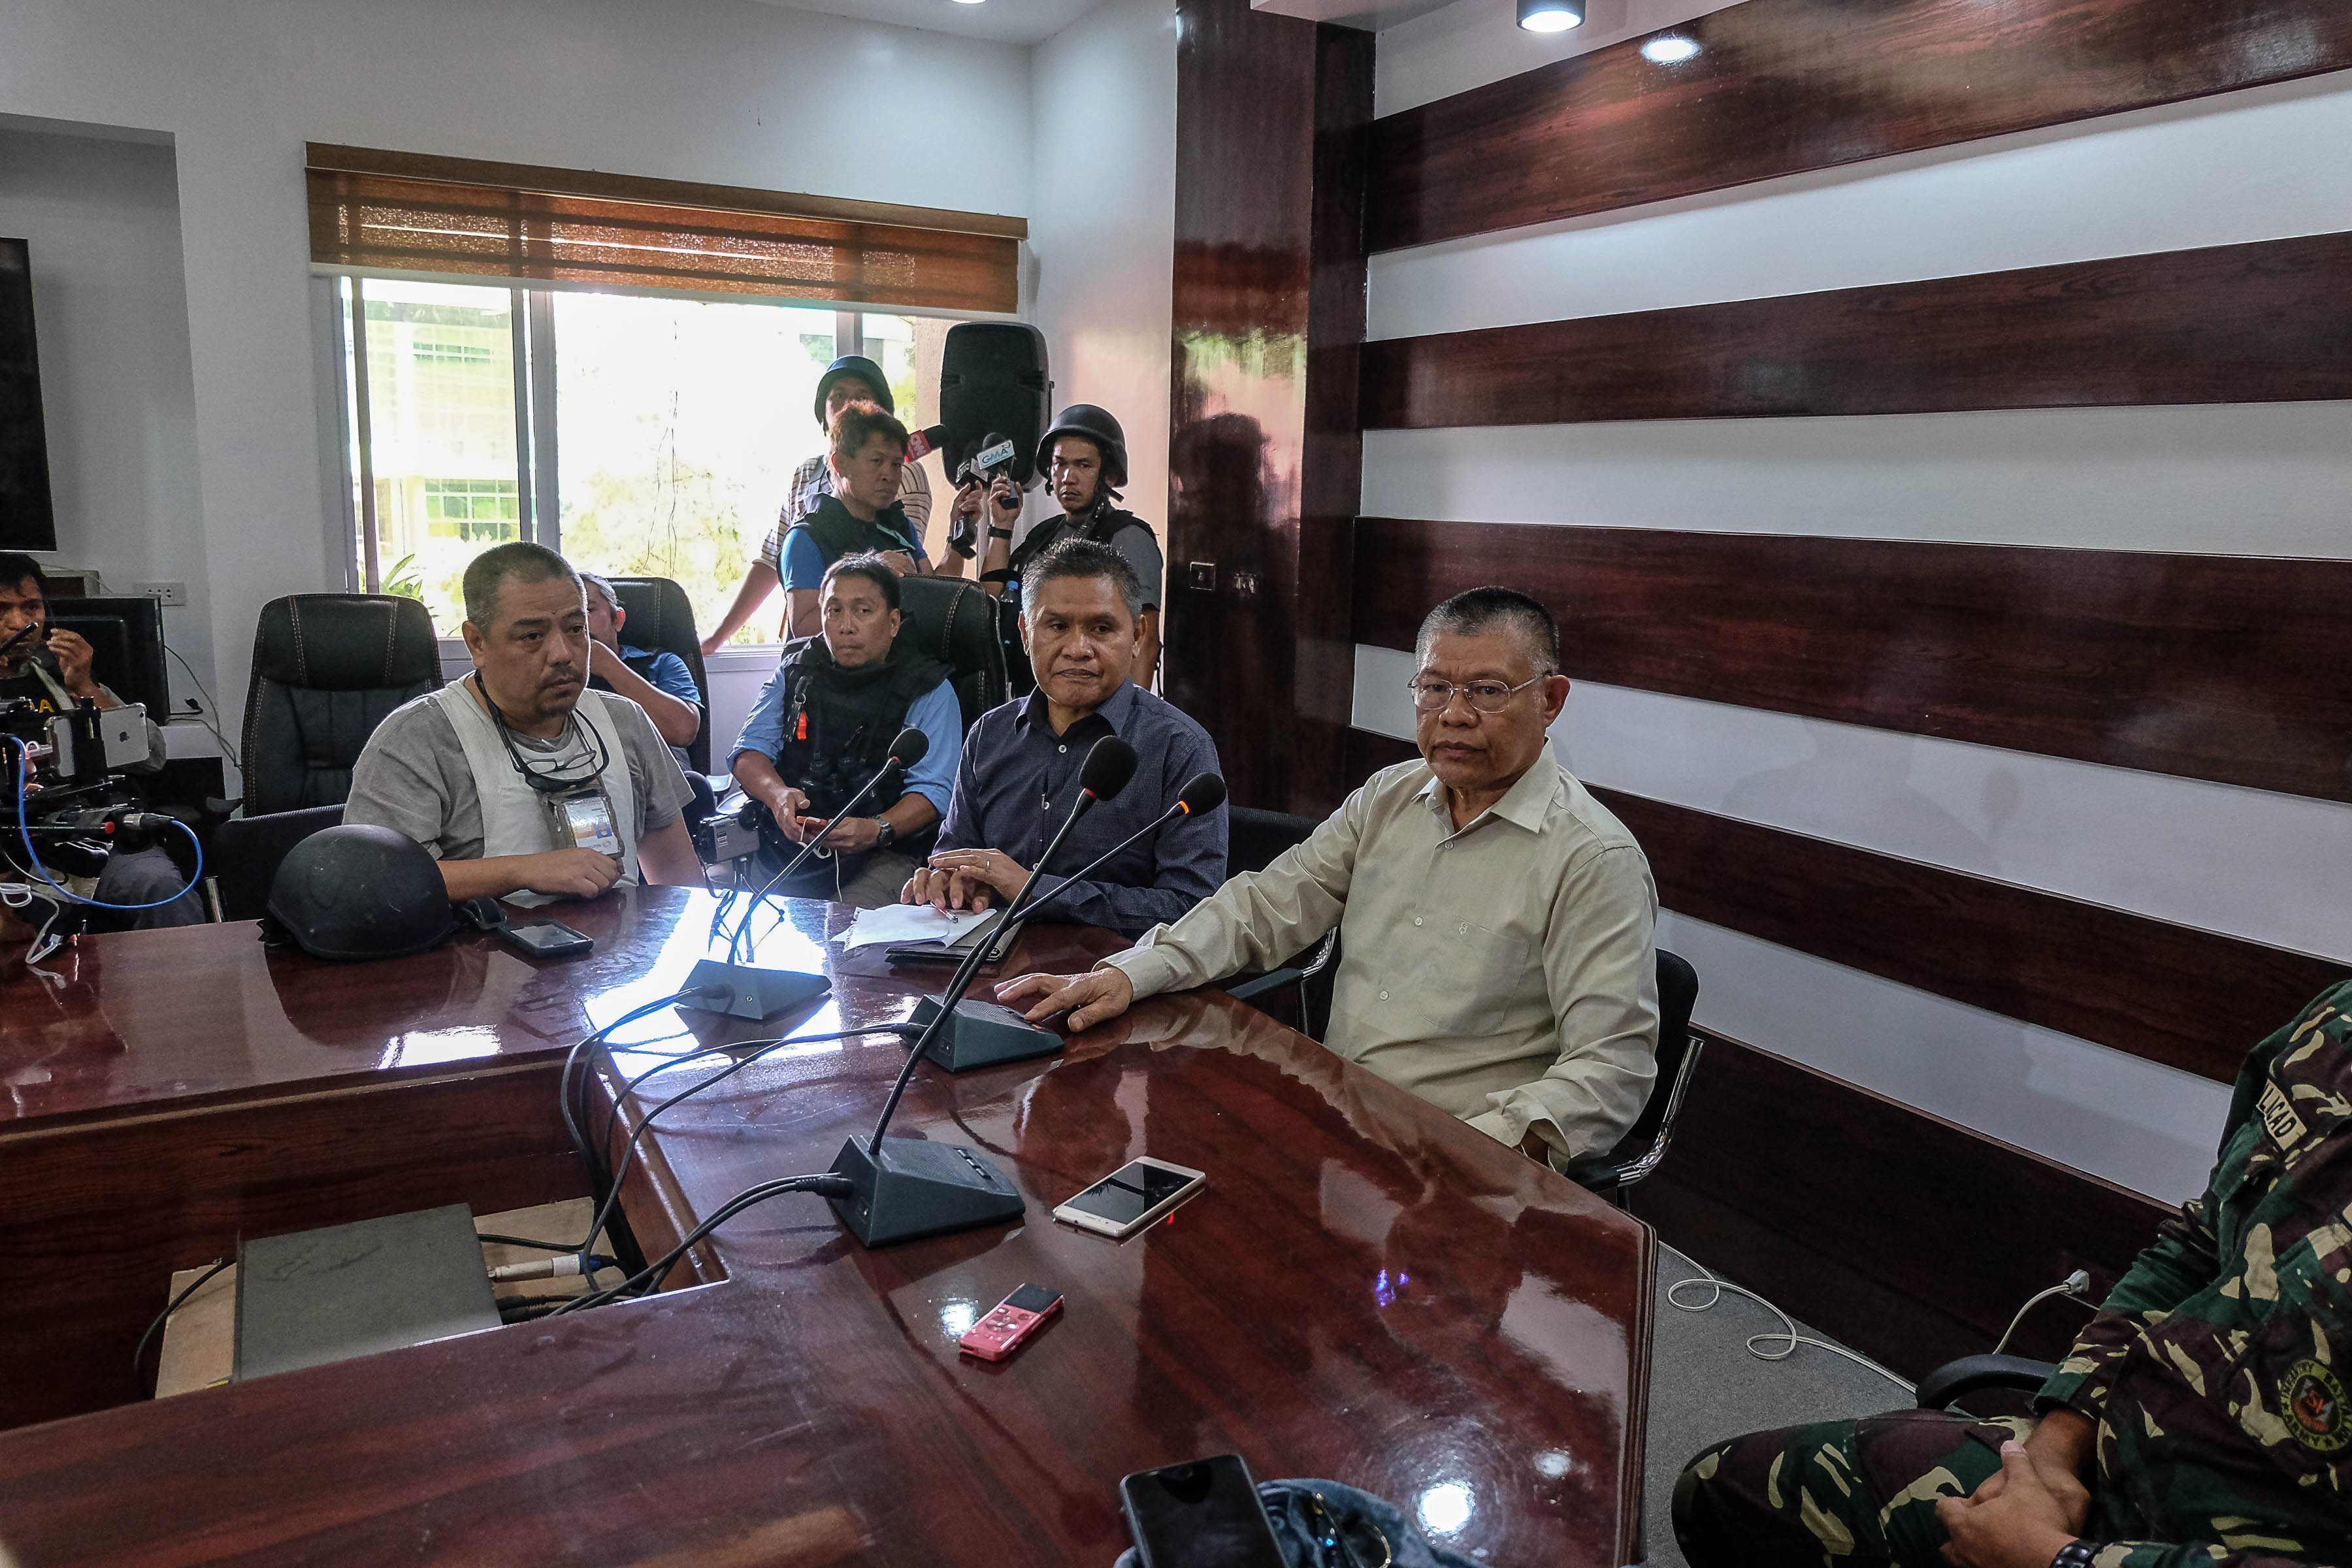 MSU PRESIDENT. Mindanao State University President Dr. Habib Macaayong says that he is confident that the MSU main campus in Marawi City will open its doors to its 14 thousand students for its 2nd semester on time despite the on-going armed conflict Marawi City. (bobby lagsa/rappler)
 